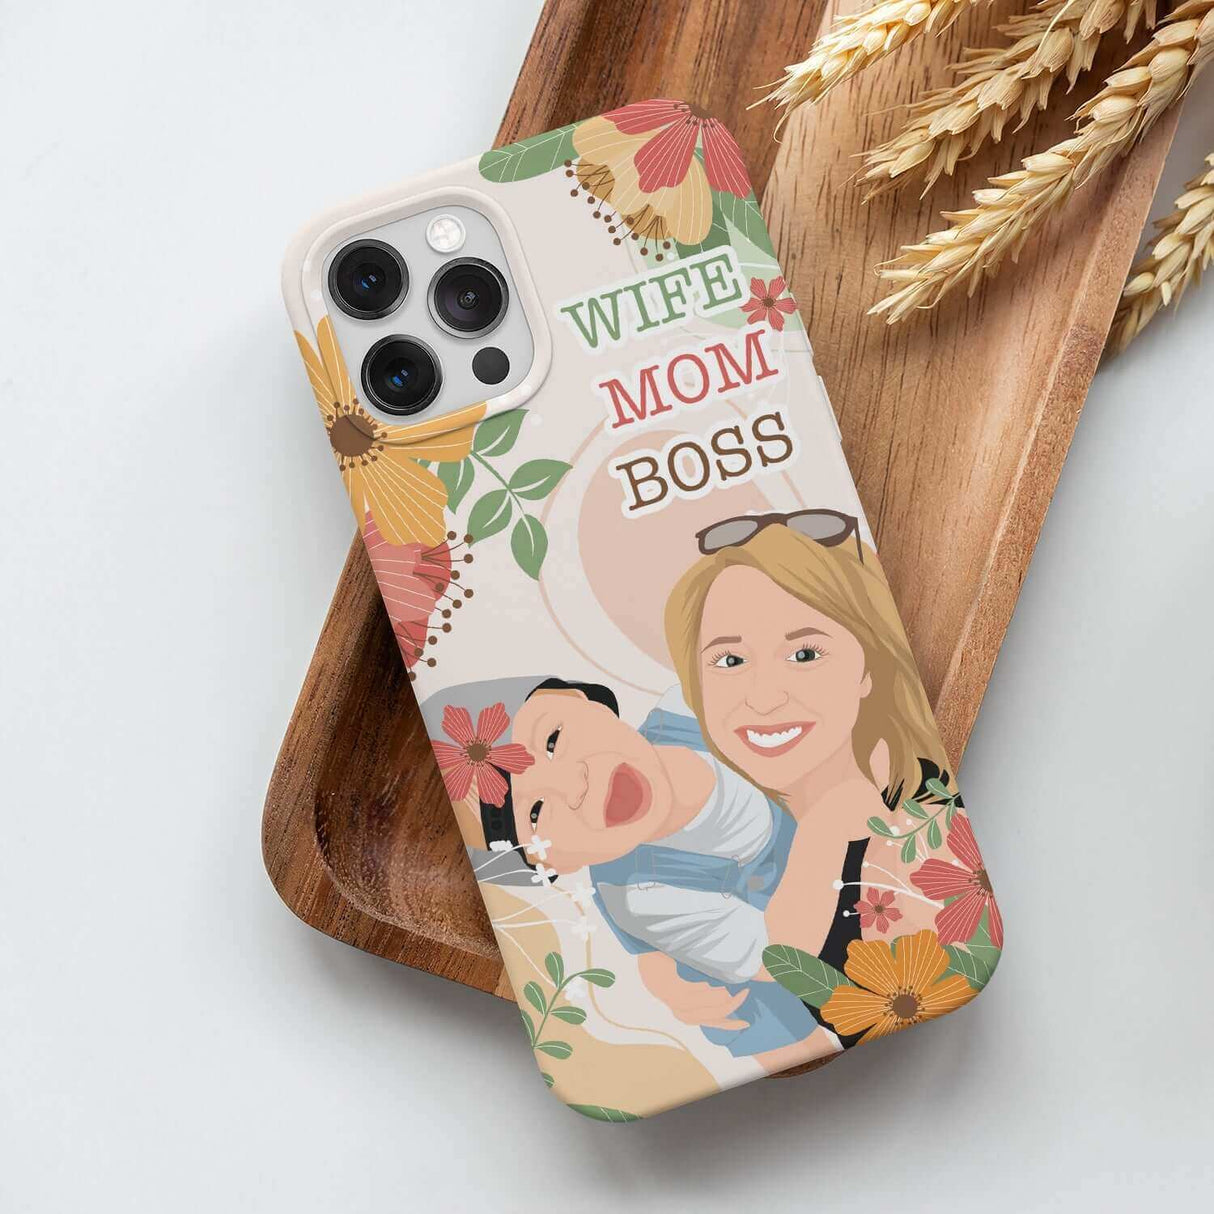 Wife Mom Boss Phone Case Personalized